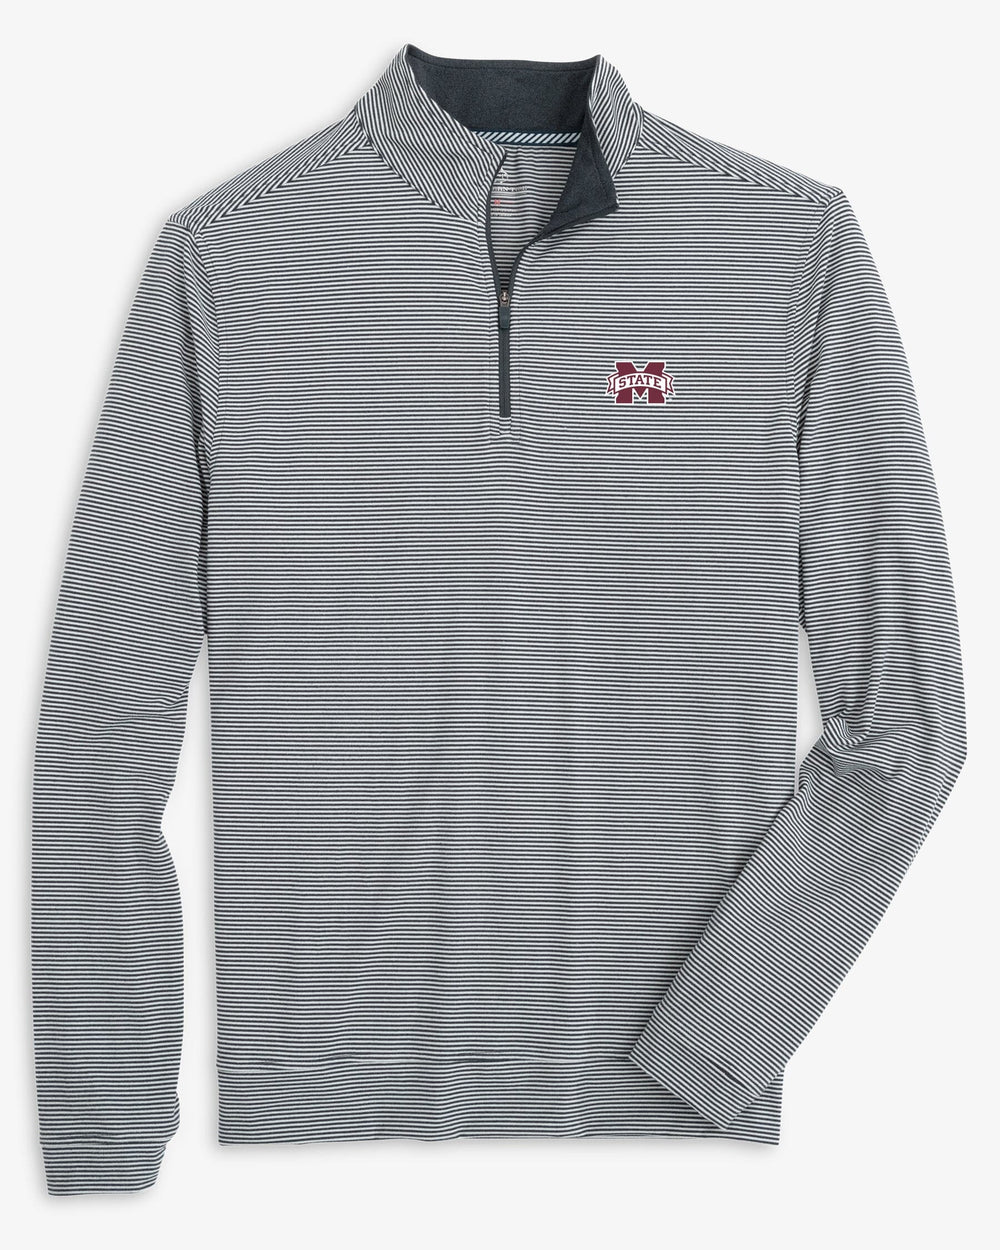 The front view of the Mississippi State Bulldogs Cruiser Micro-Stripe Heather Quarter Zip by Southern Tide - Heather Black